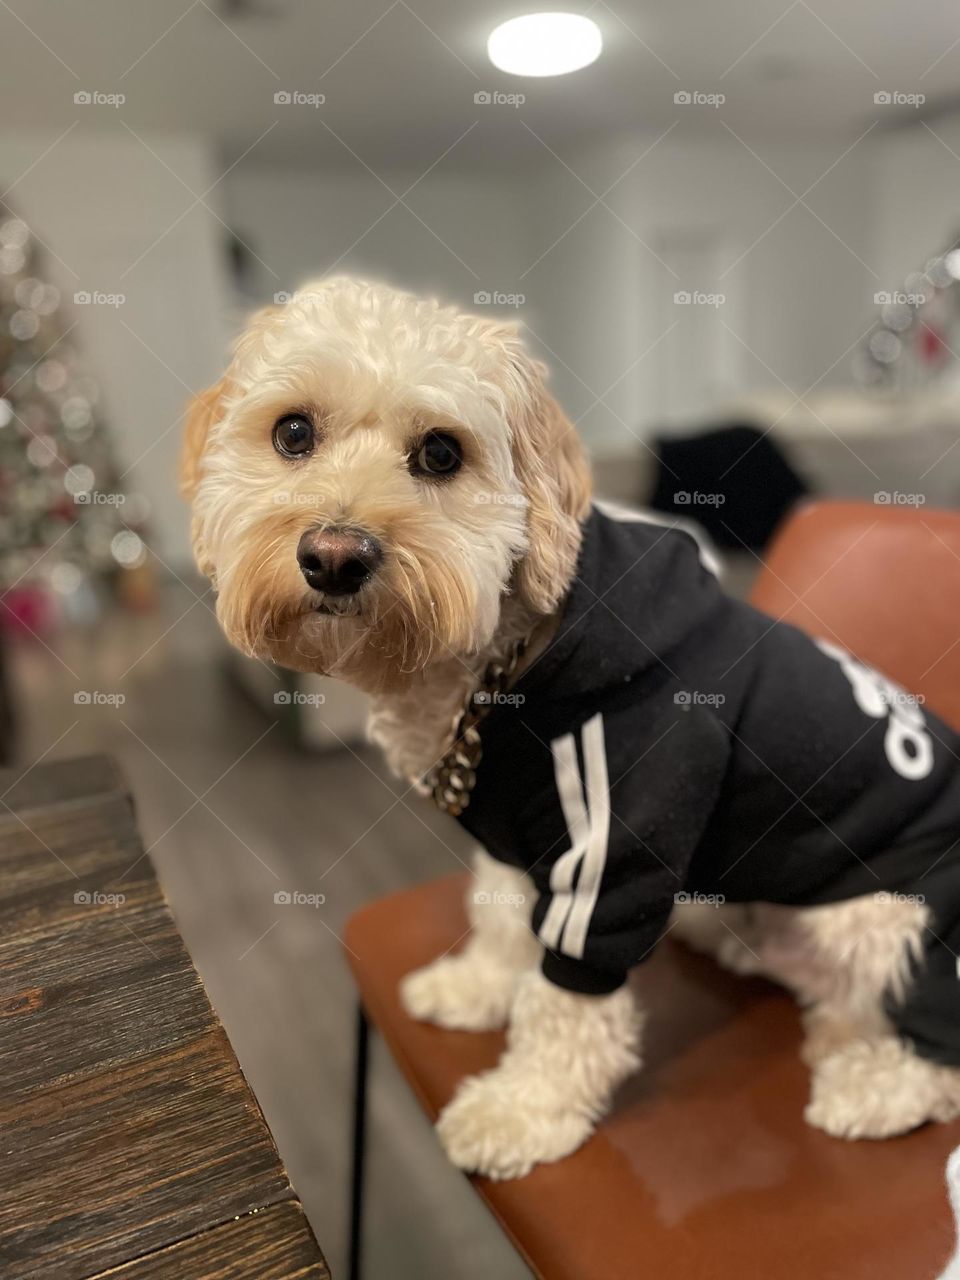 Cavachon Puppy Dressed in Adidas Sweatsuit and Gold Chain